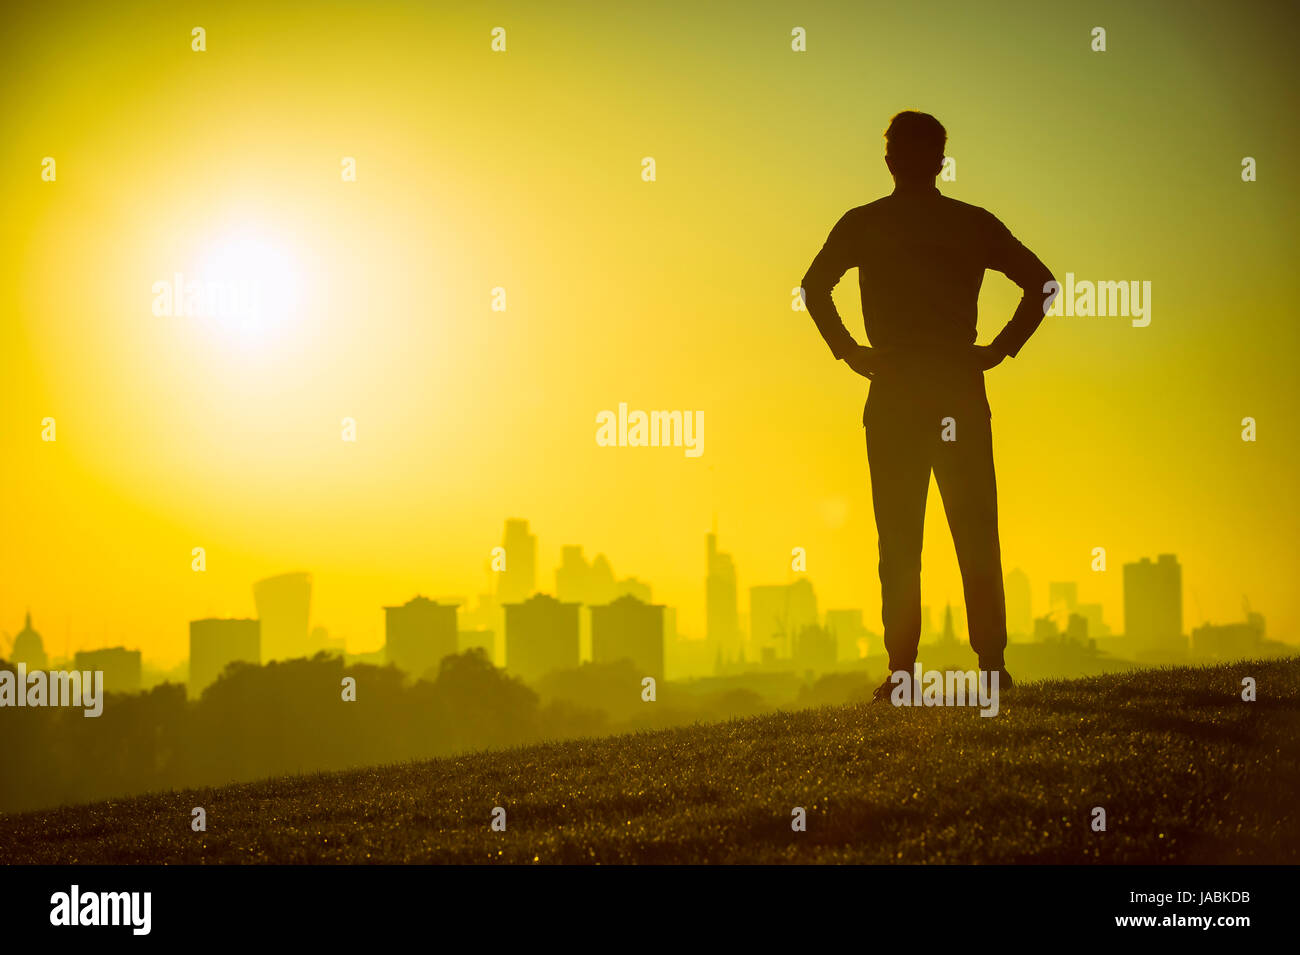 Silhouette of a defiant man with hands on hips looking out at the sunrise city skyline. Stock Photo